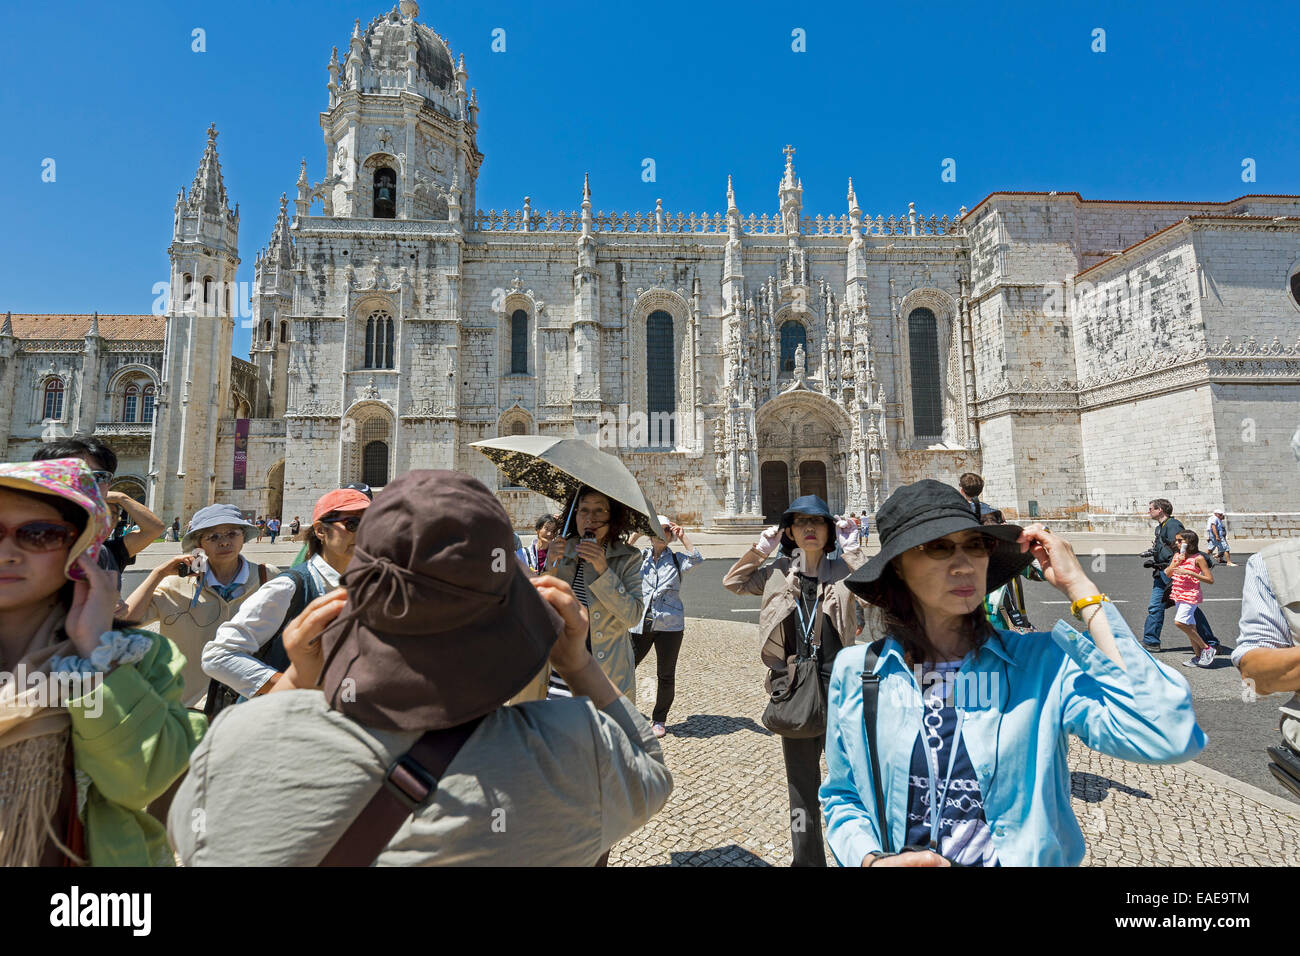 Japanese tourists in front of the Mosteiro dos Jerónimos, Jeronimos Monastery, UNESCO World Cultural Heritage Site, Belém Stock Photo